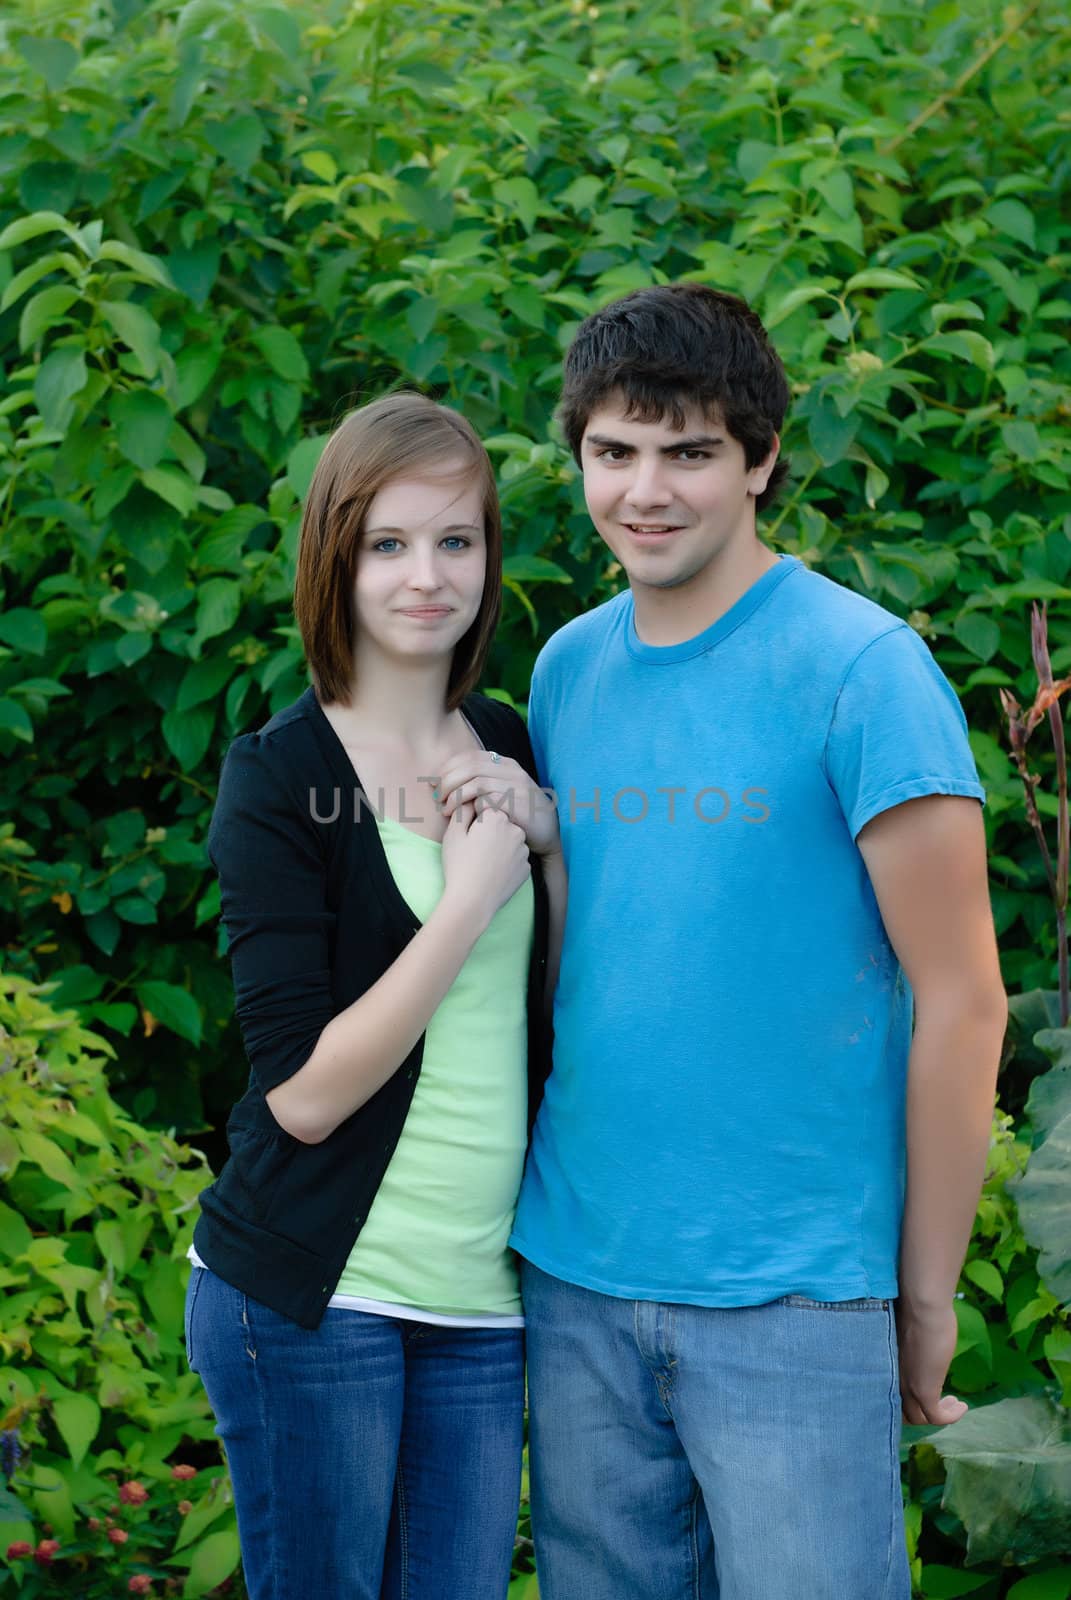 A young couple standing next to each other with green leaves in the background.